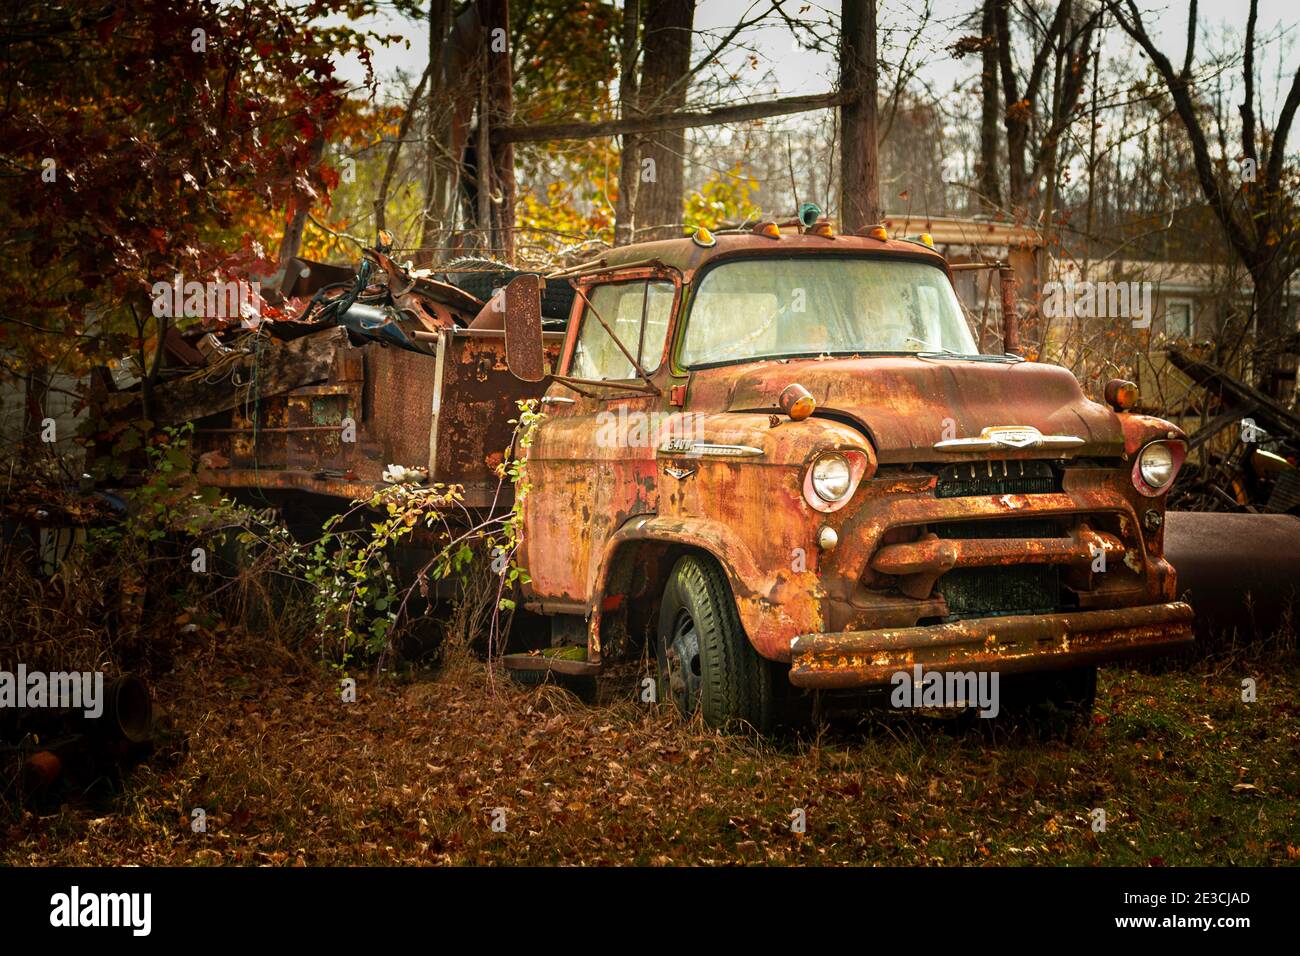 An old chevrolet grain truck rusts away in a junkyard for this fall scene.  This image was taken in western Jackson County, IN. Stock Photo